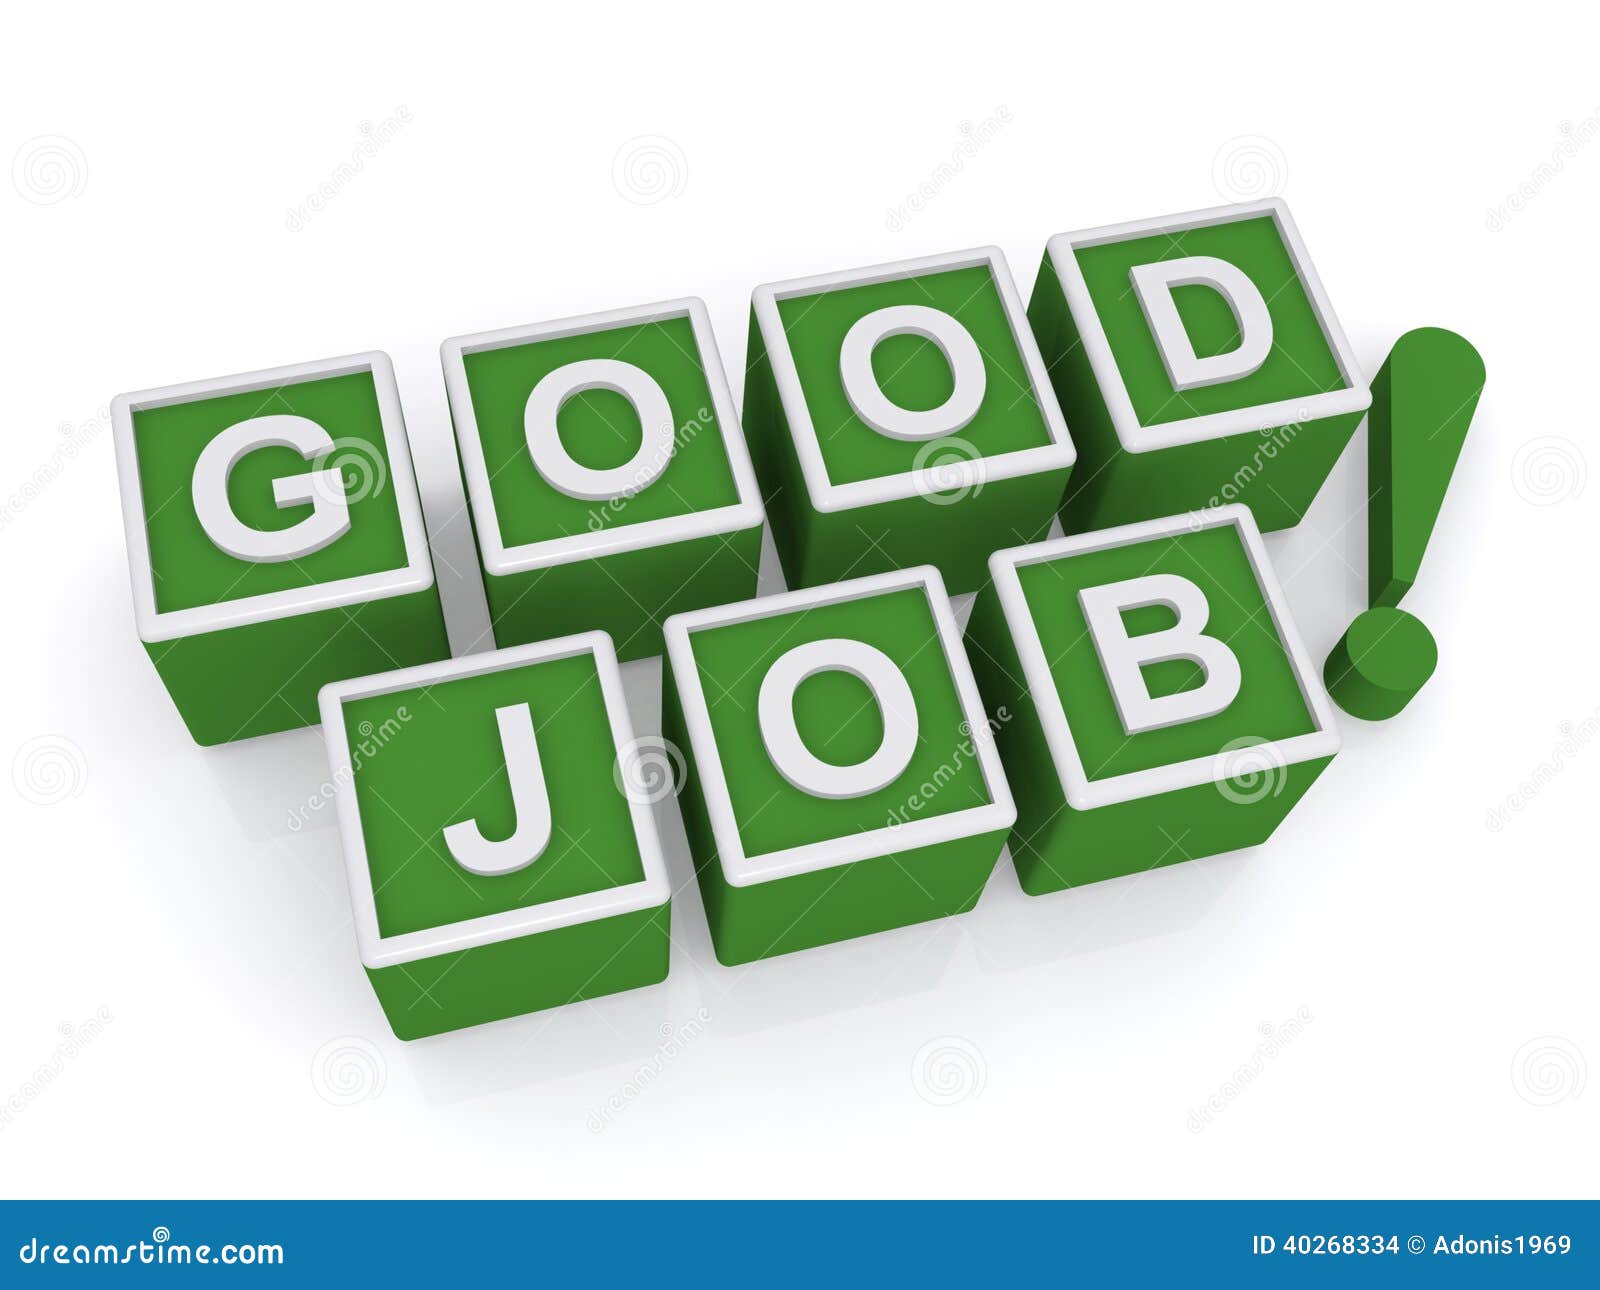 http://thumbs.dreamstime.com/z/good-job-sign-green-letter-blocks-spelling-words-exclamation-mark-white-background-40268334.jpg